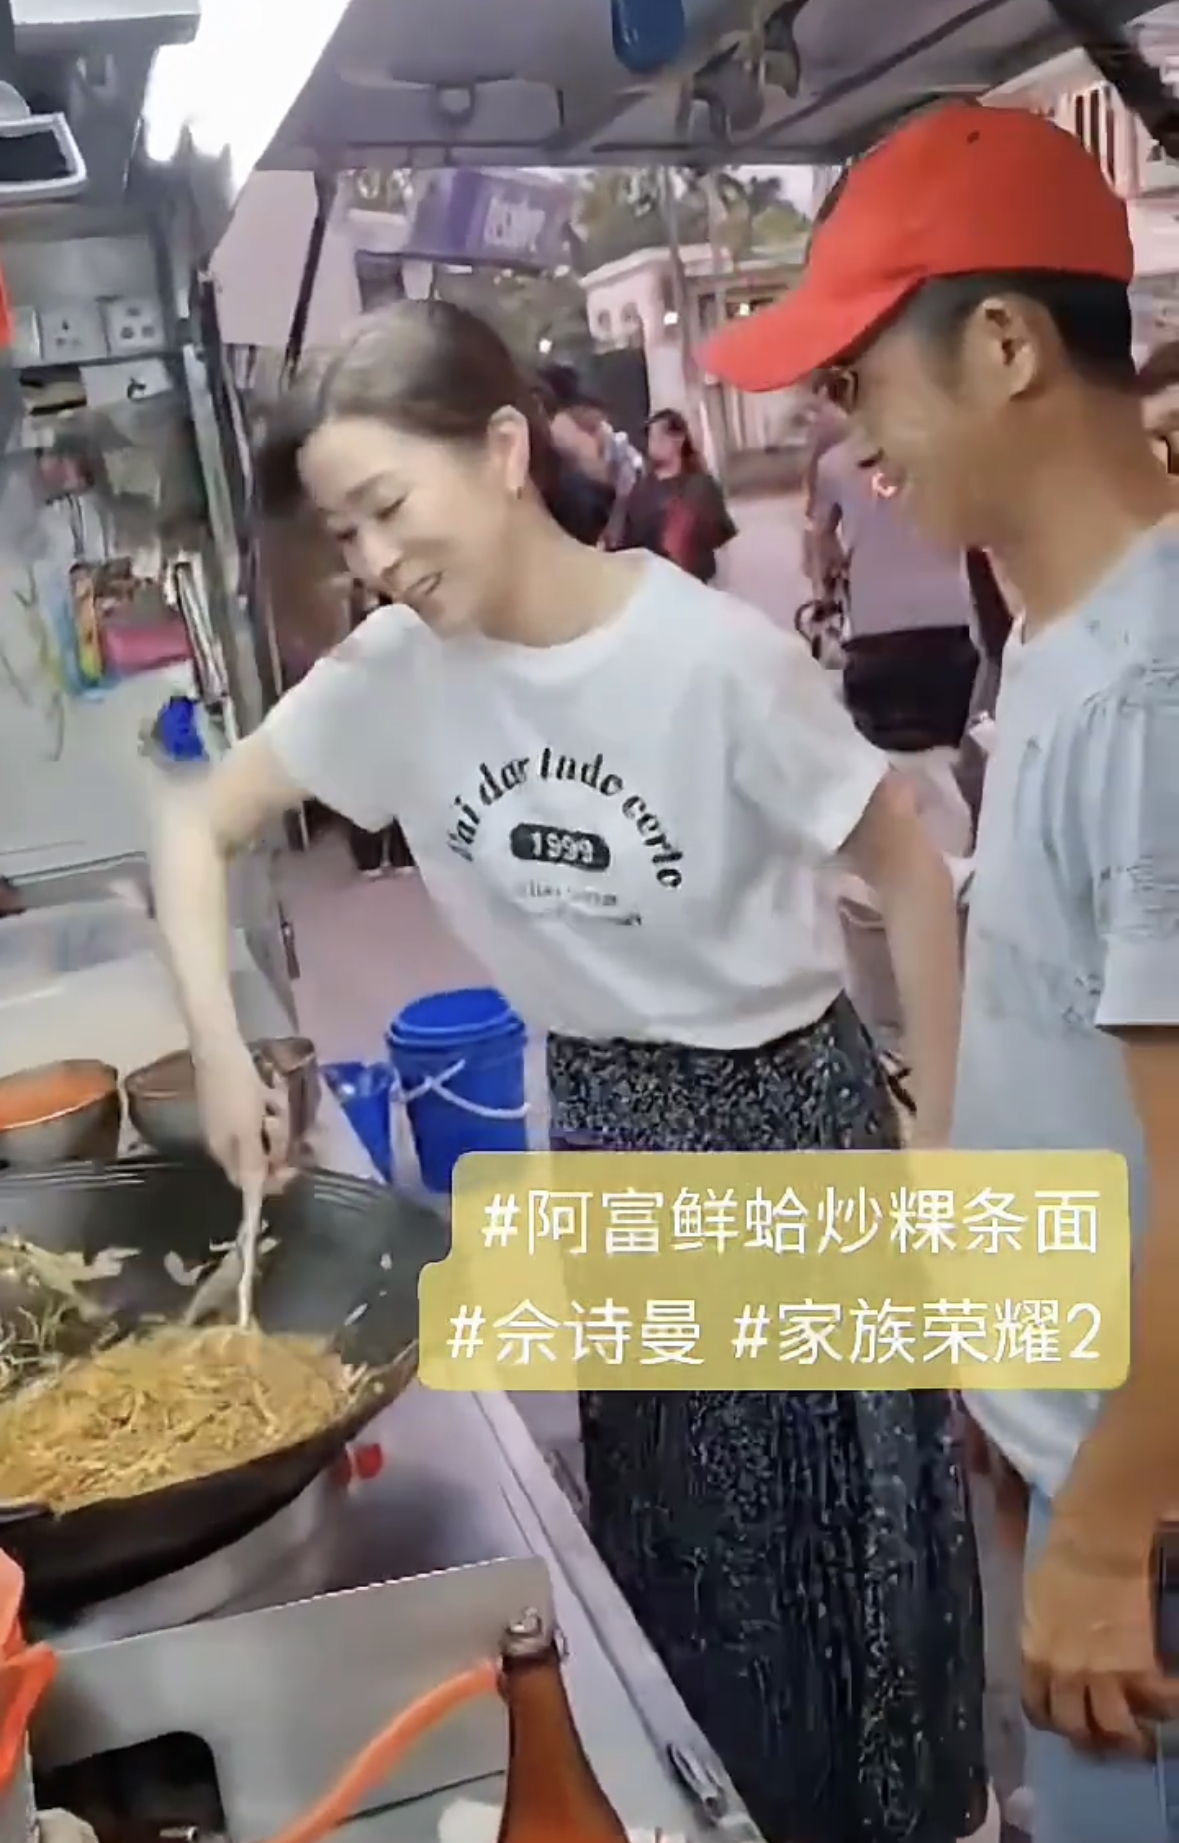 Hk actress charmaine sheh spotted frying char kuey teow at the roadside in kl 1